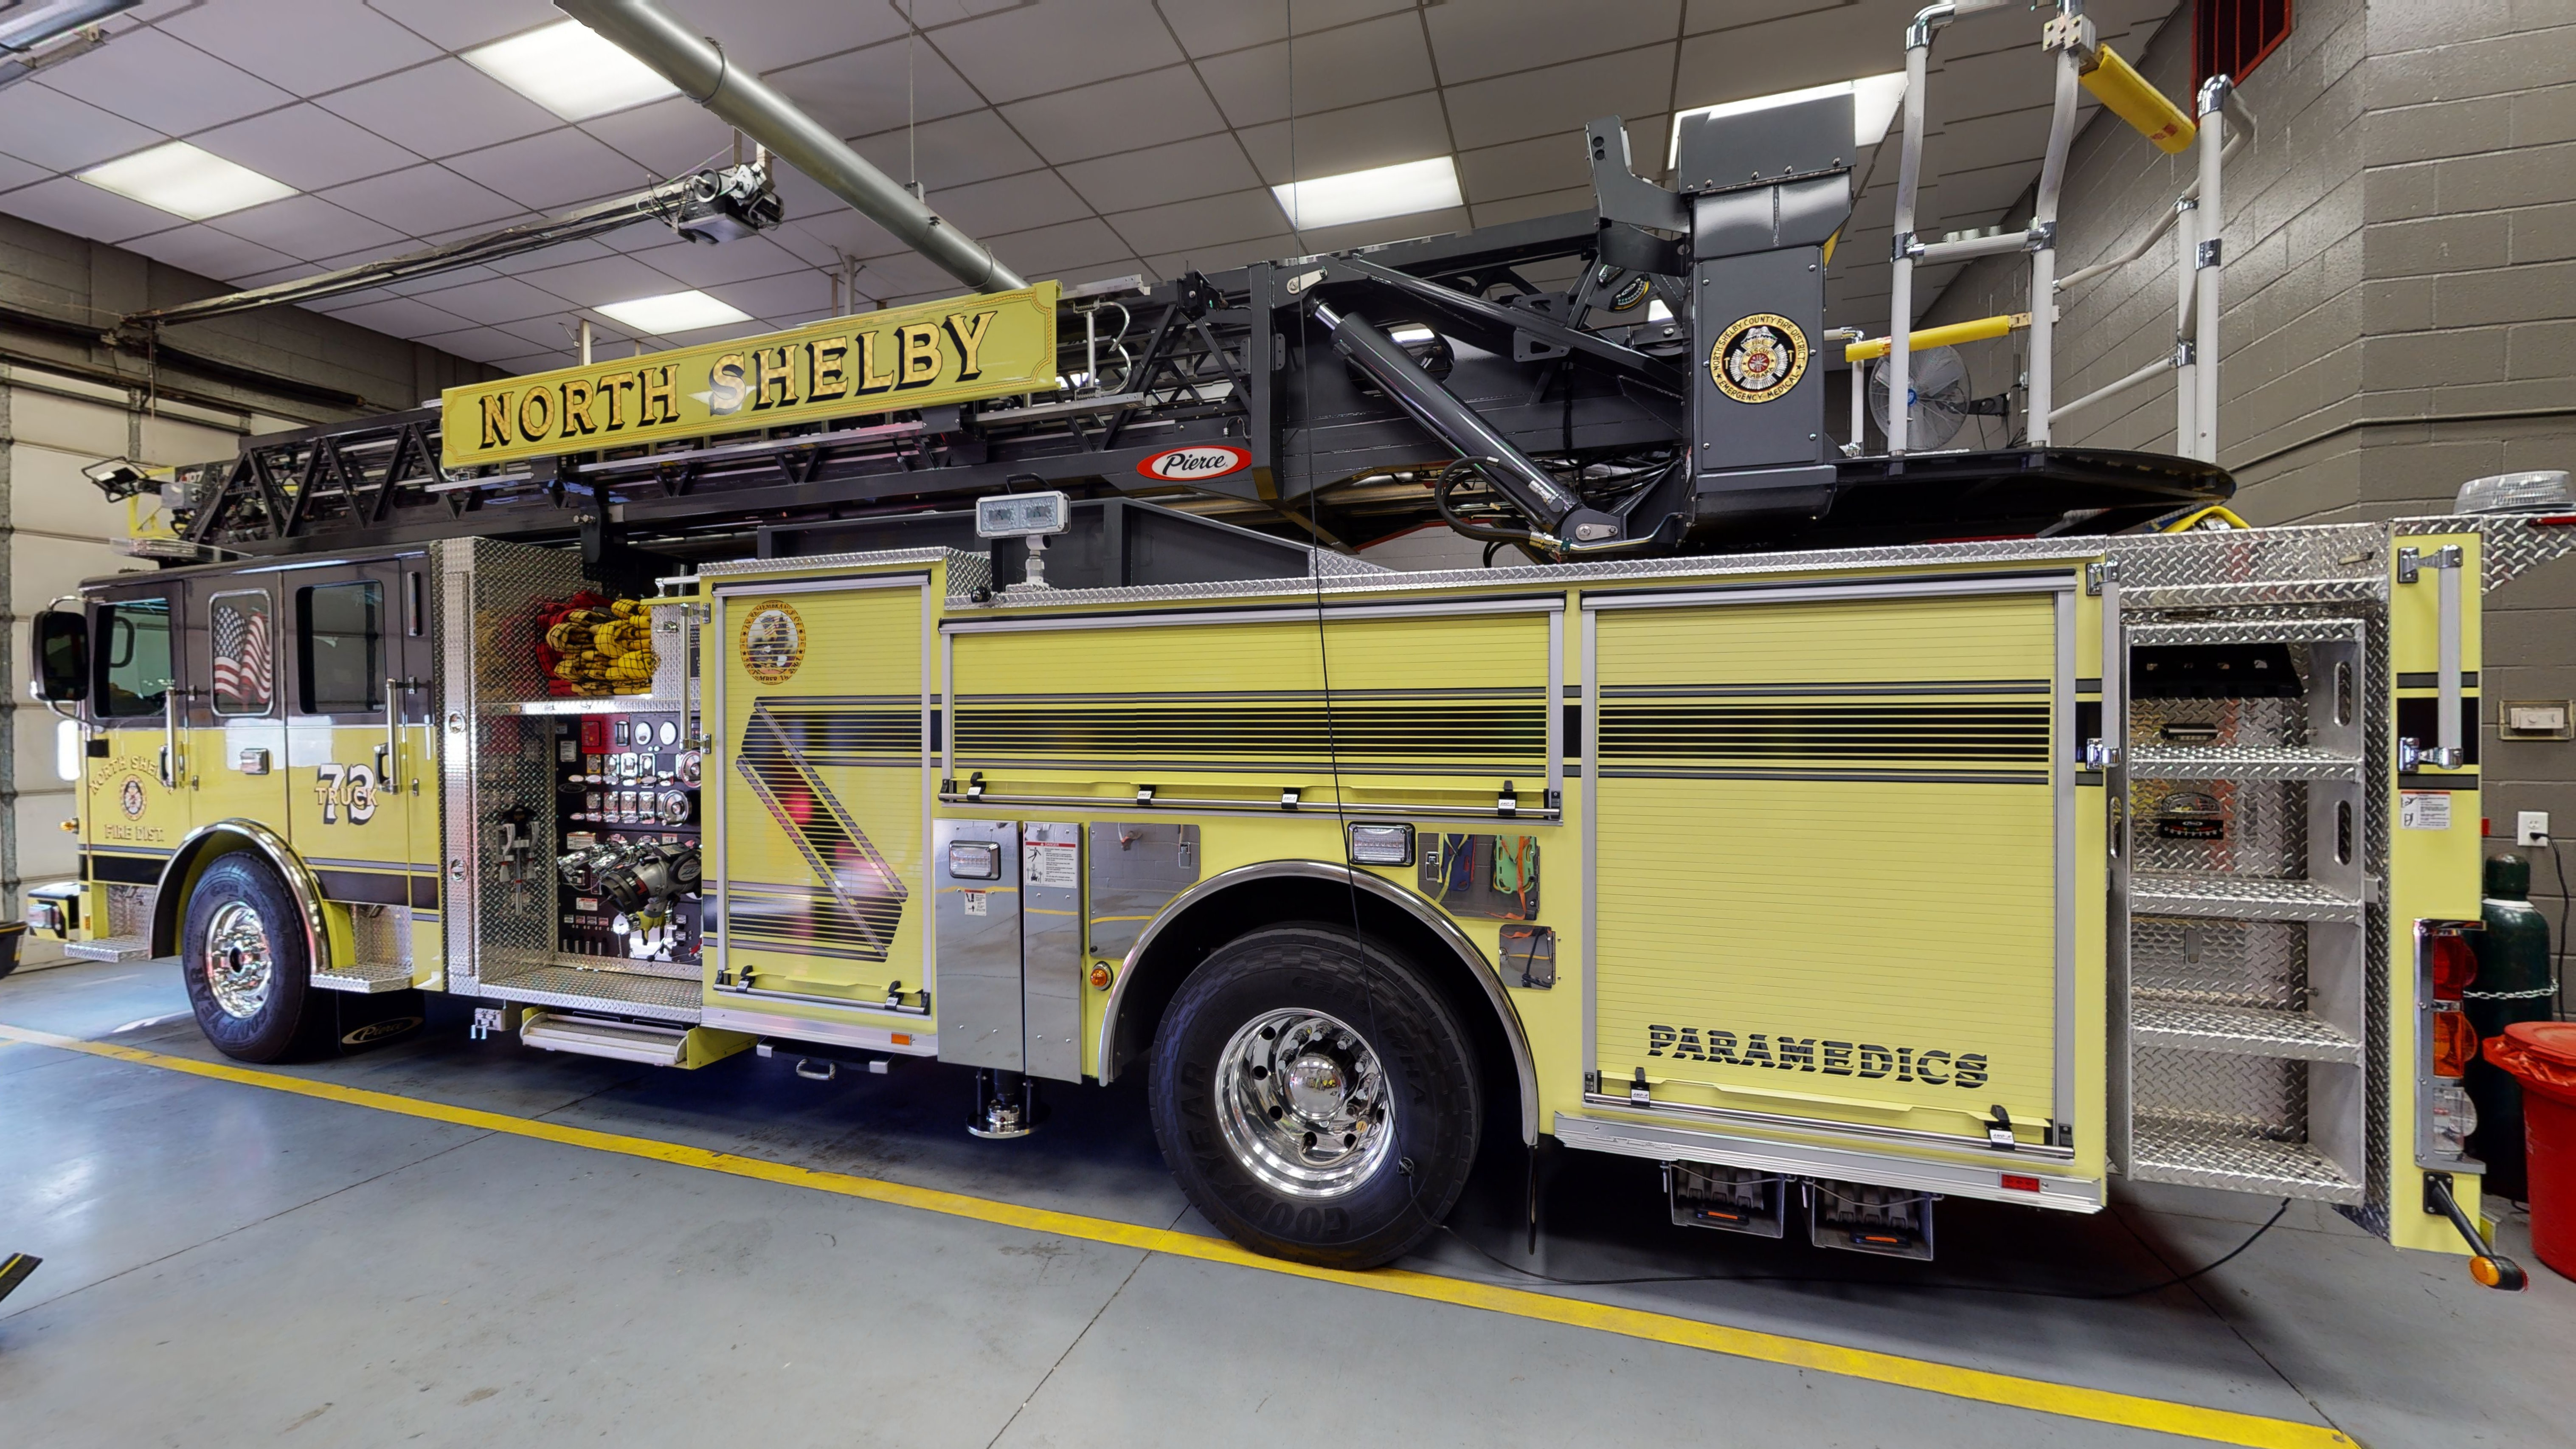 1_North-Shelby-Fire-District-06162021_155646